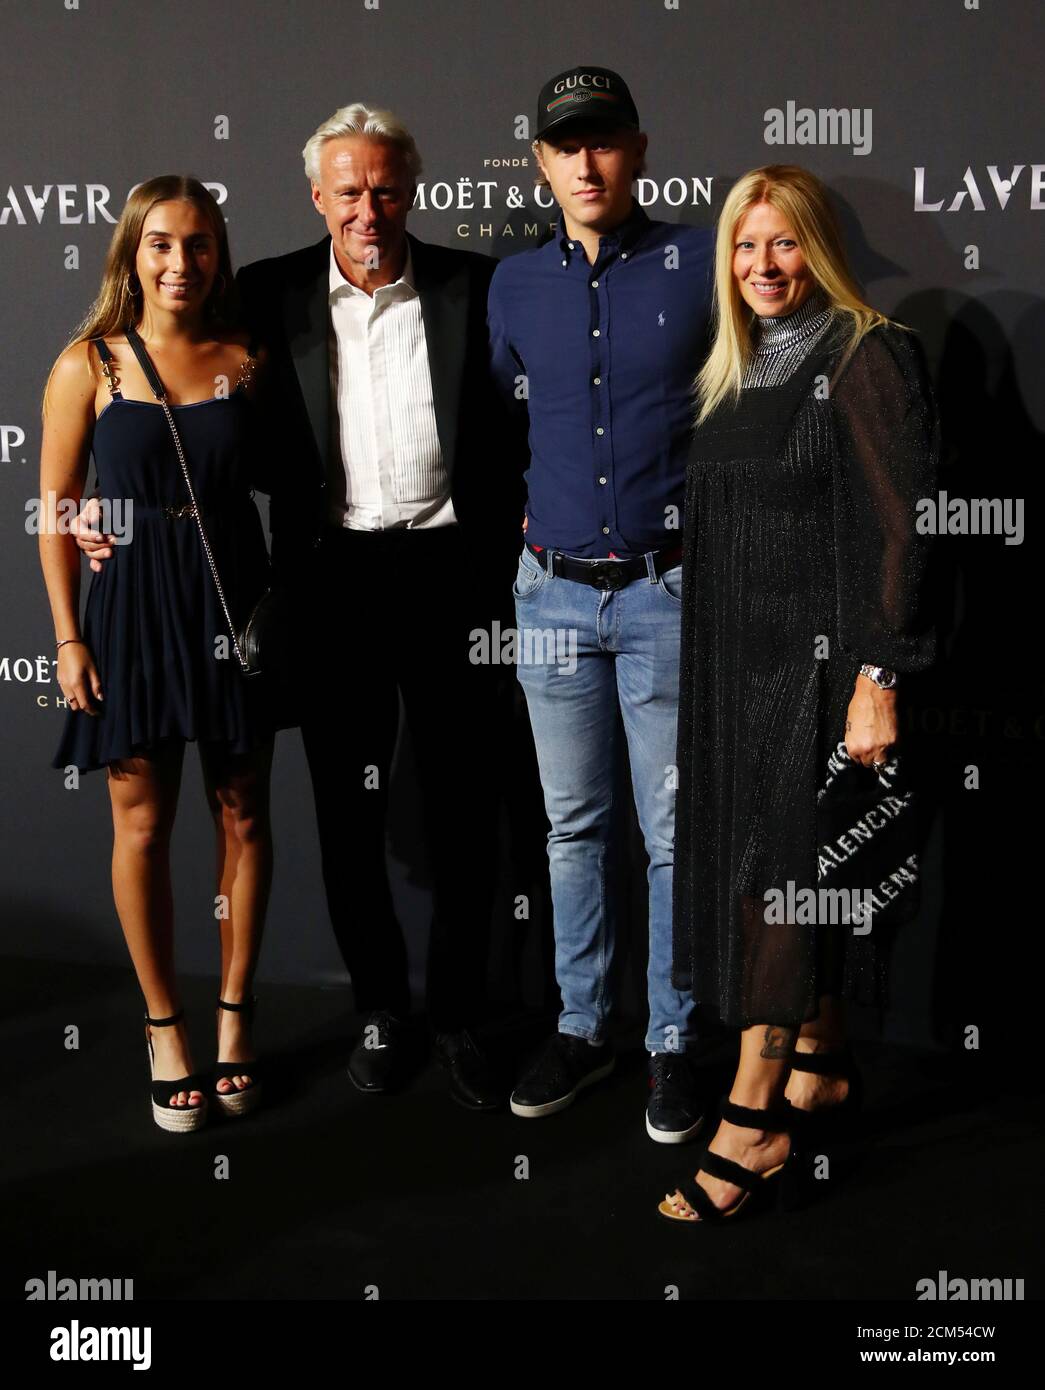 Tennis - Laver Cup - Arrival of players at Gala night - Geneva, Switzerland  - September 19, 2019 Team Europe captain Bjorn Borg poses for a photograph  with his wife Patricia Ostfeldt